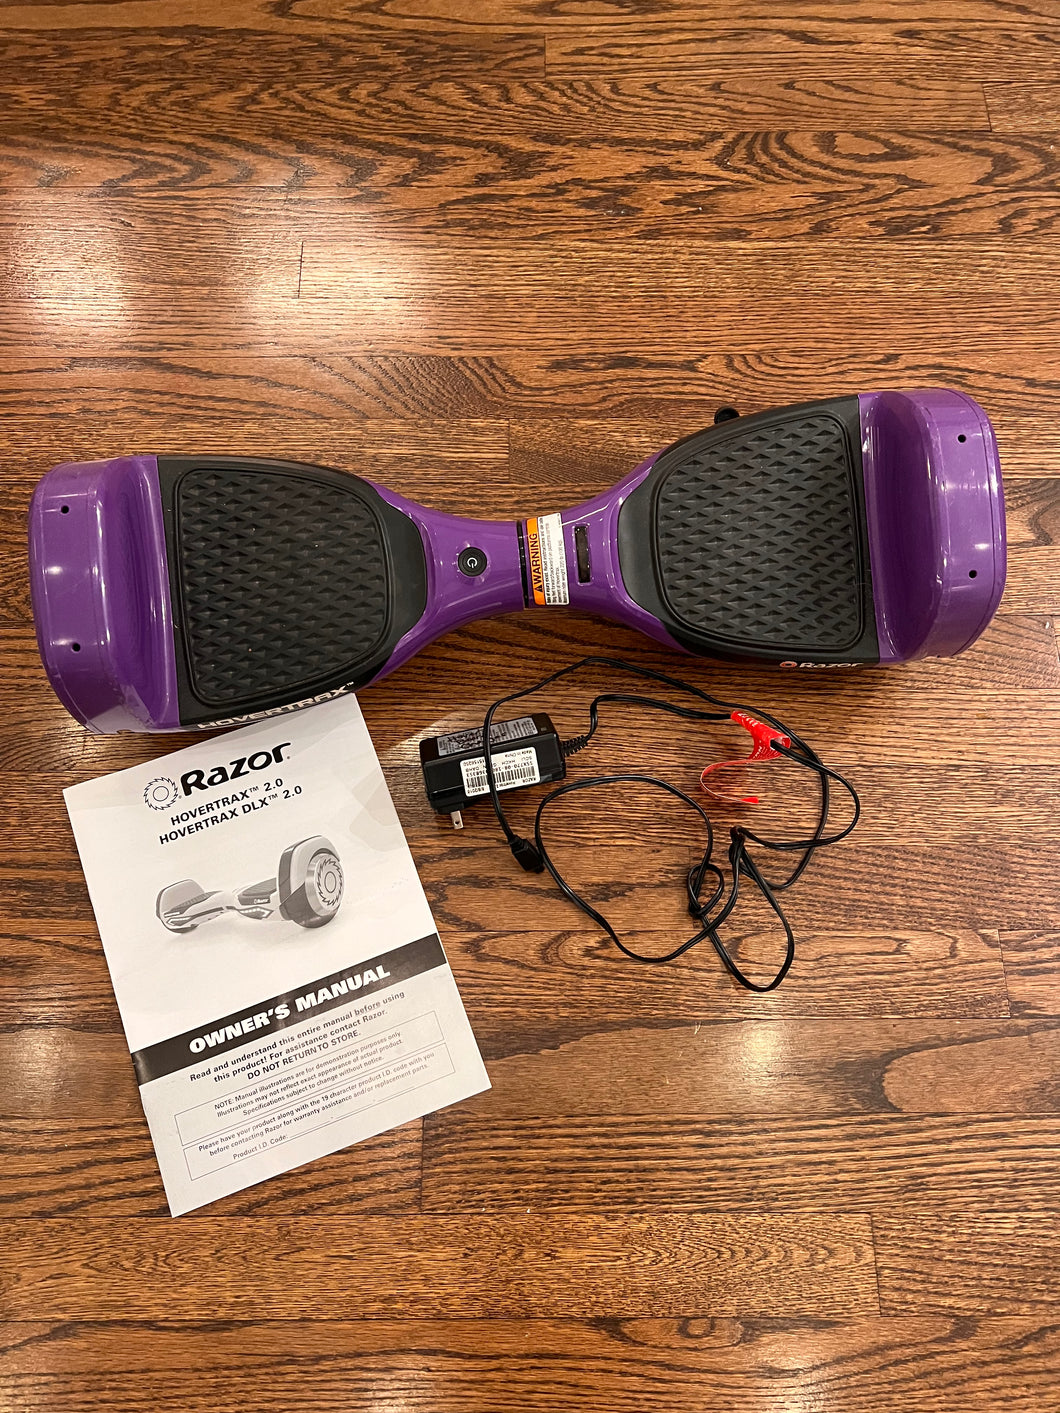 Razor Hoverboard - w original instructions .* charge